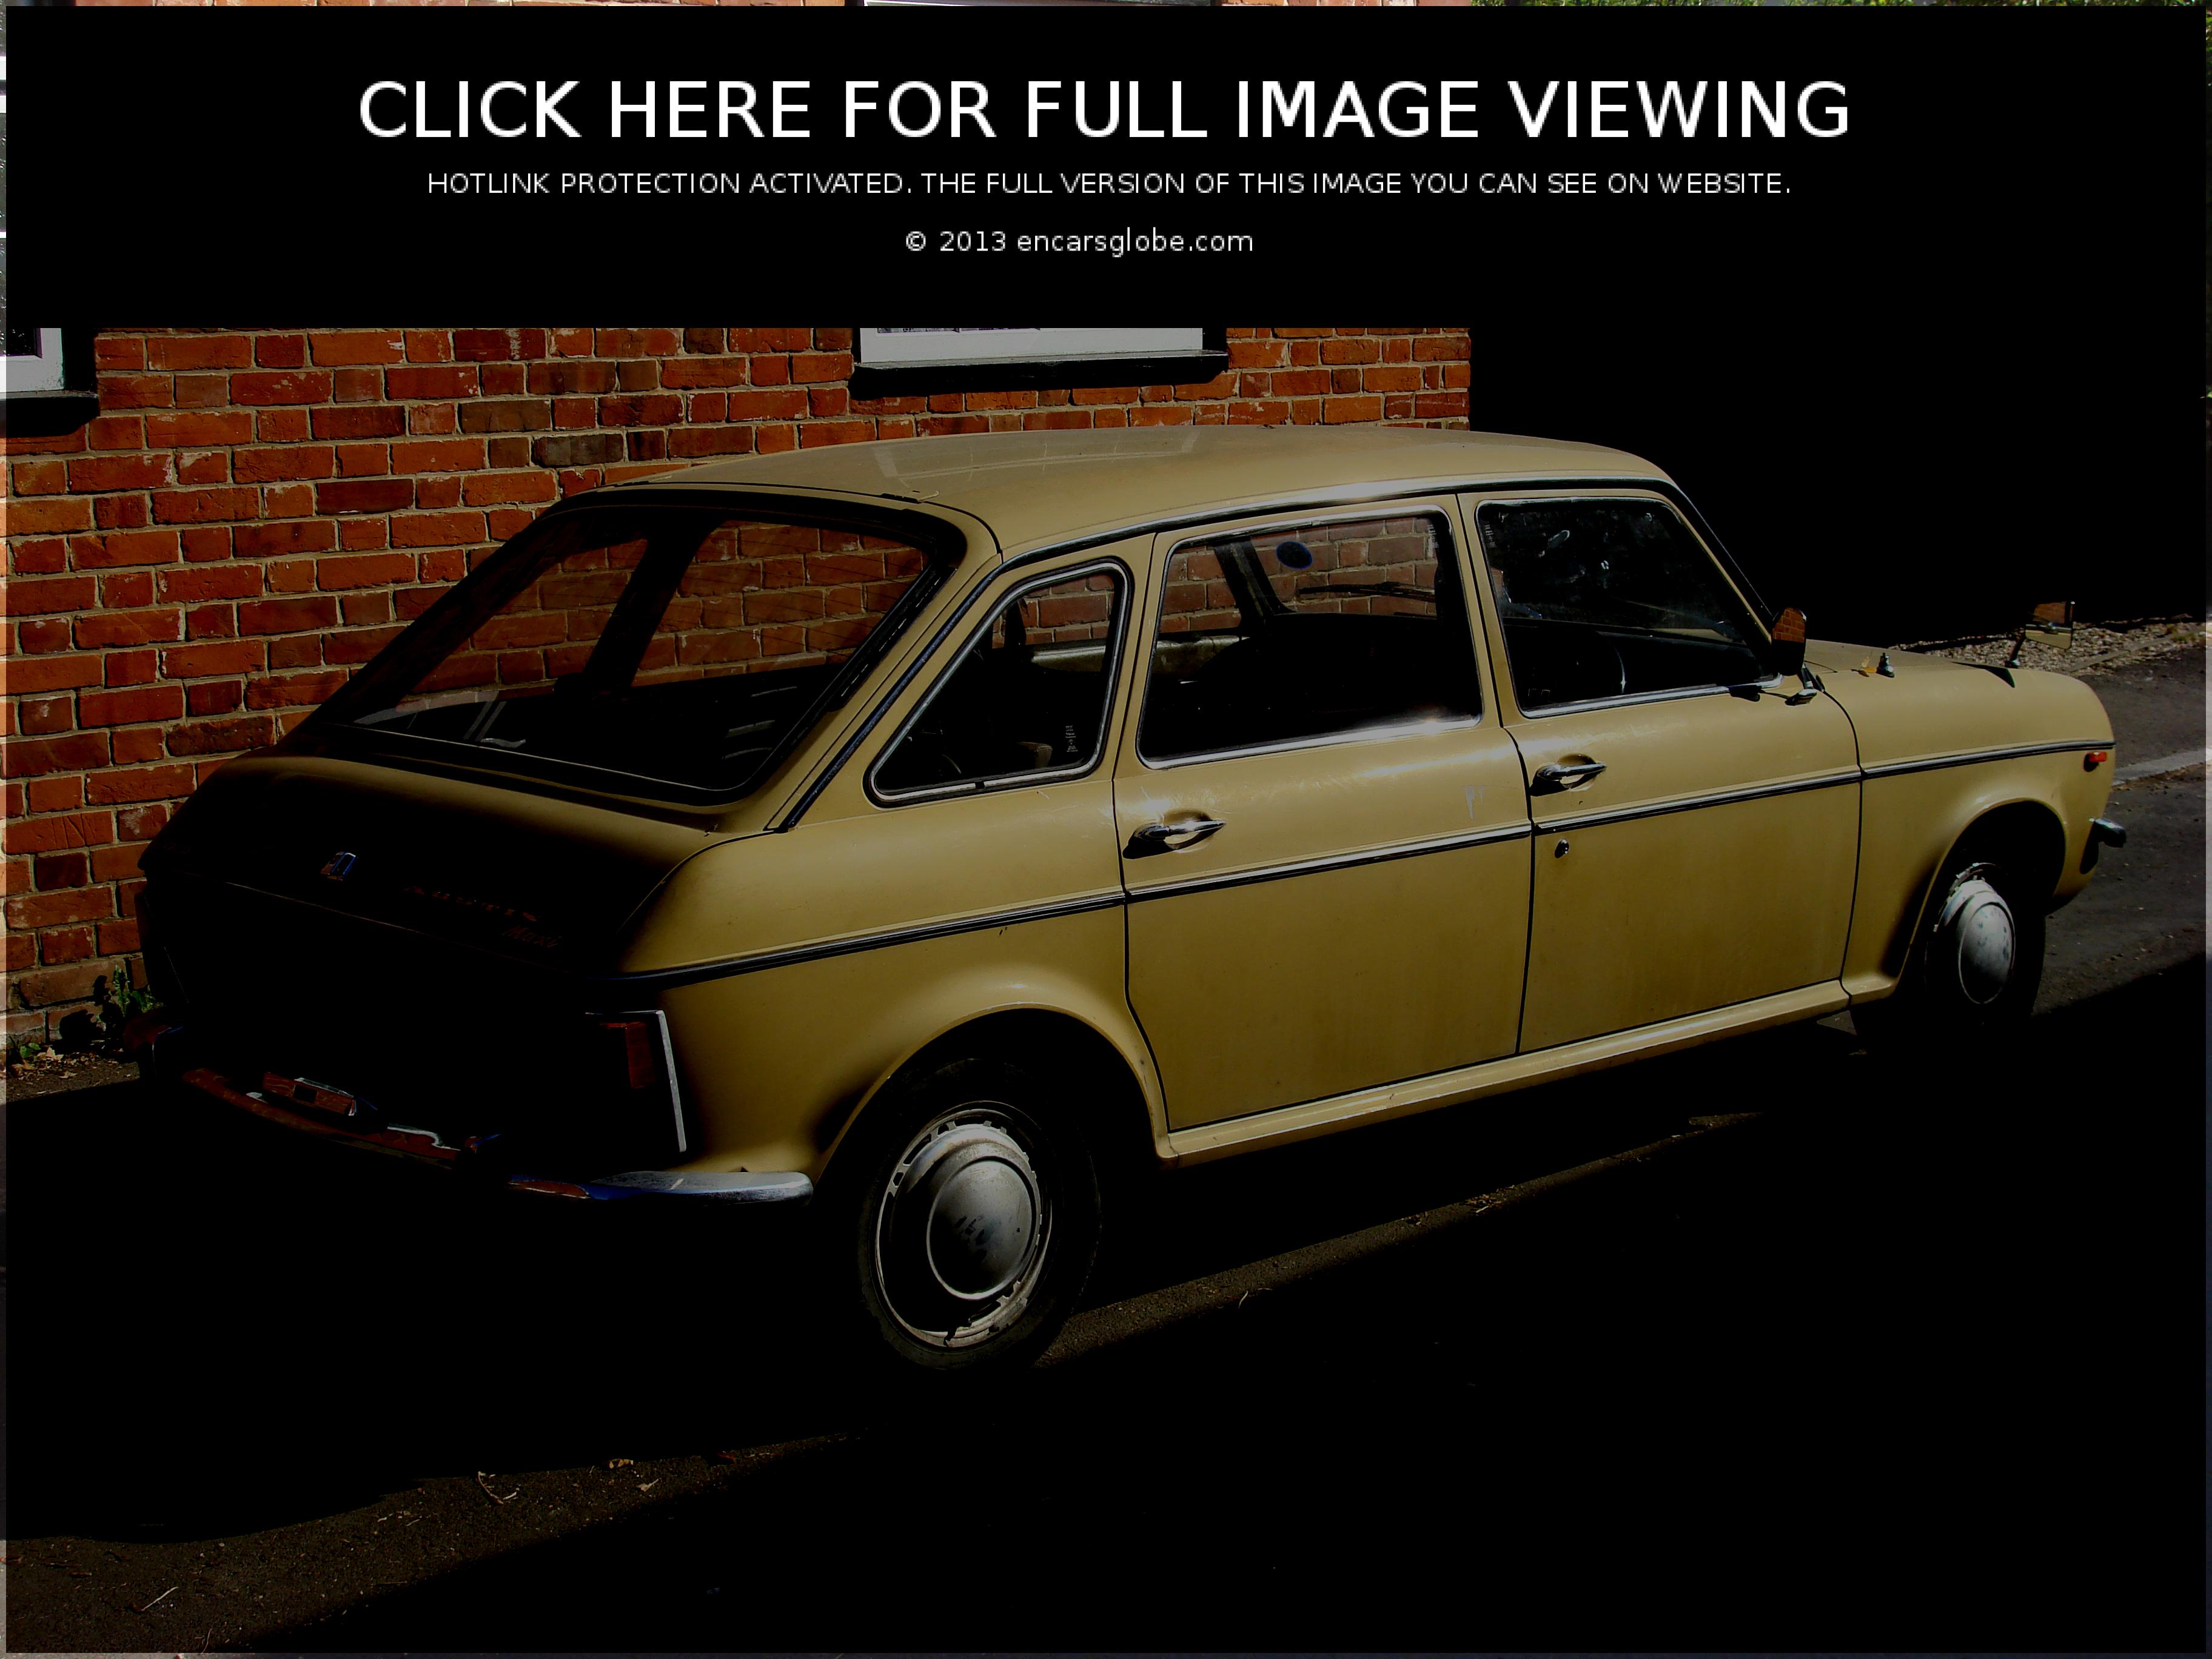 Austin Maxi 2 Photo Gallery: Photo #11 out of 7, Image Size - 640 ...